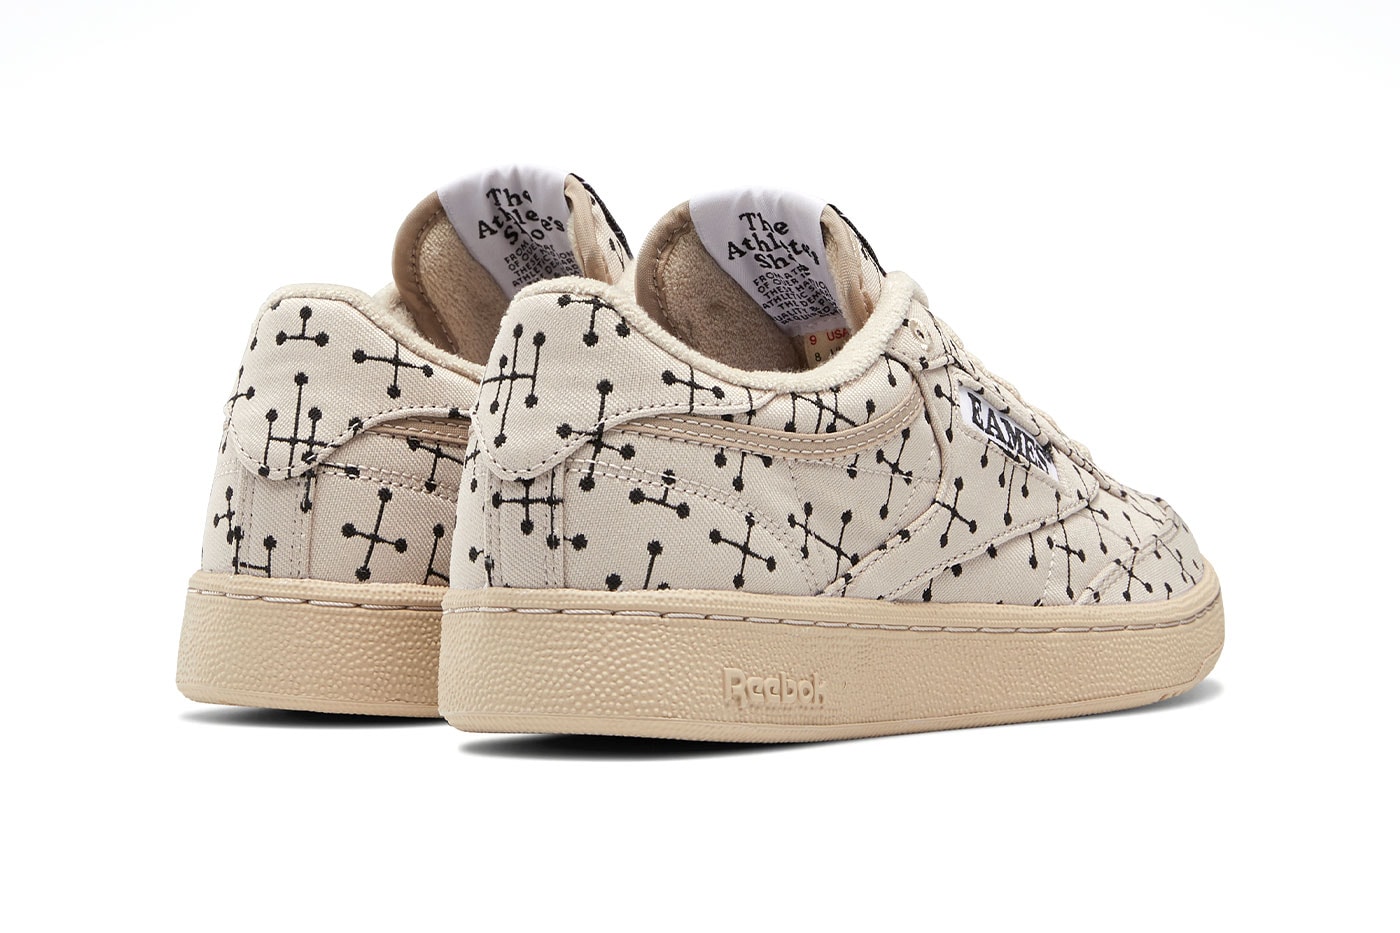 Eames Reebok Club C composition Dot Pattern GY1068 GY1069 competition for printed fabrics ray eames March 17 release date info price